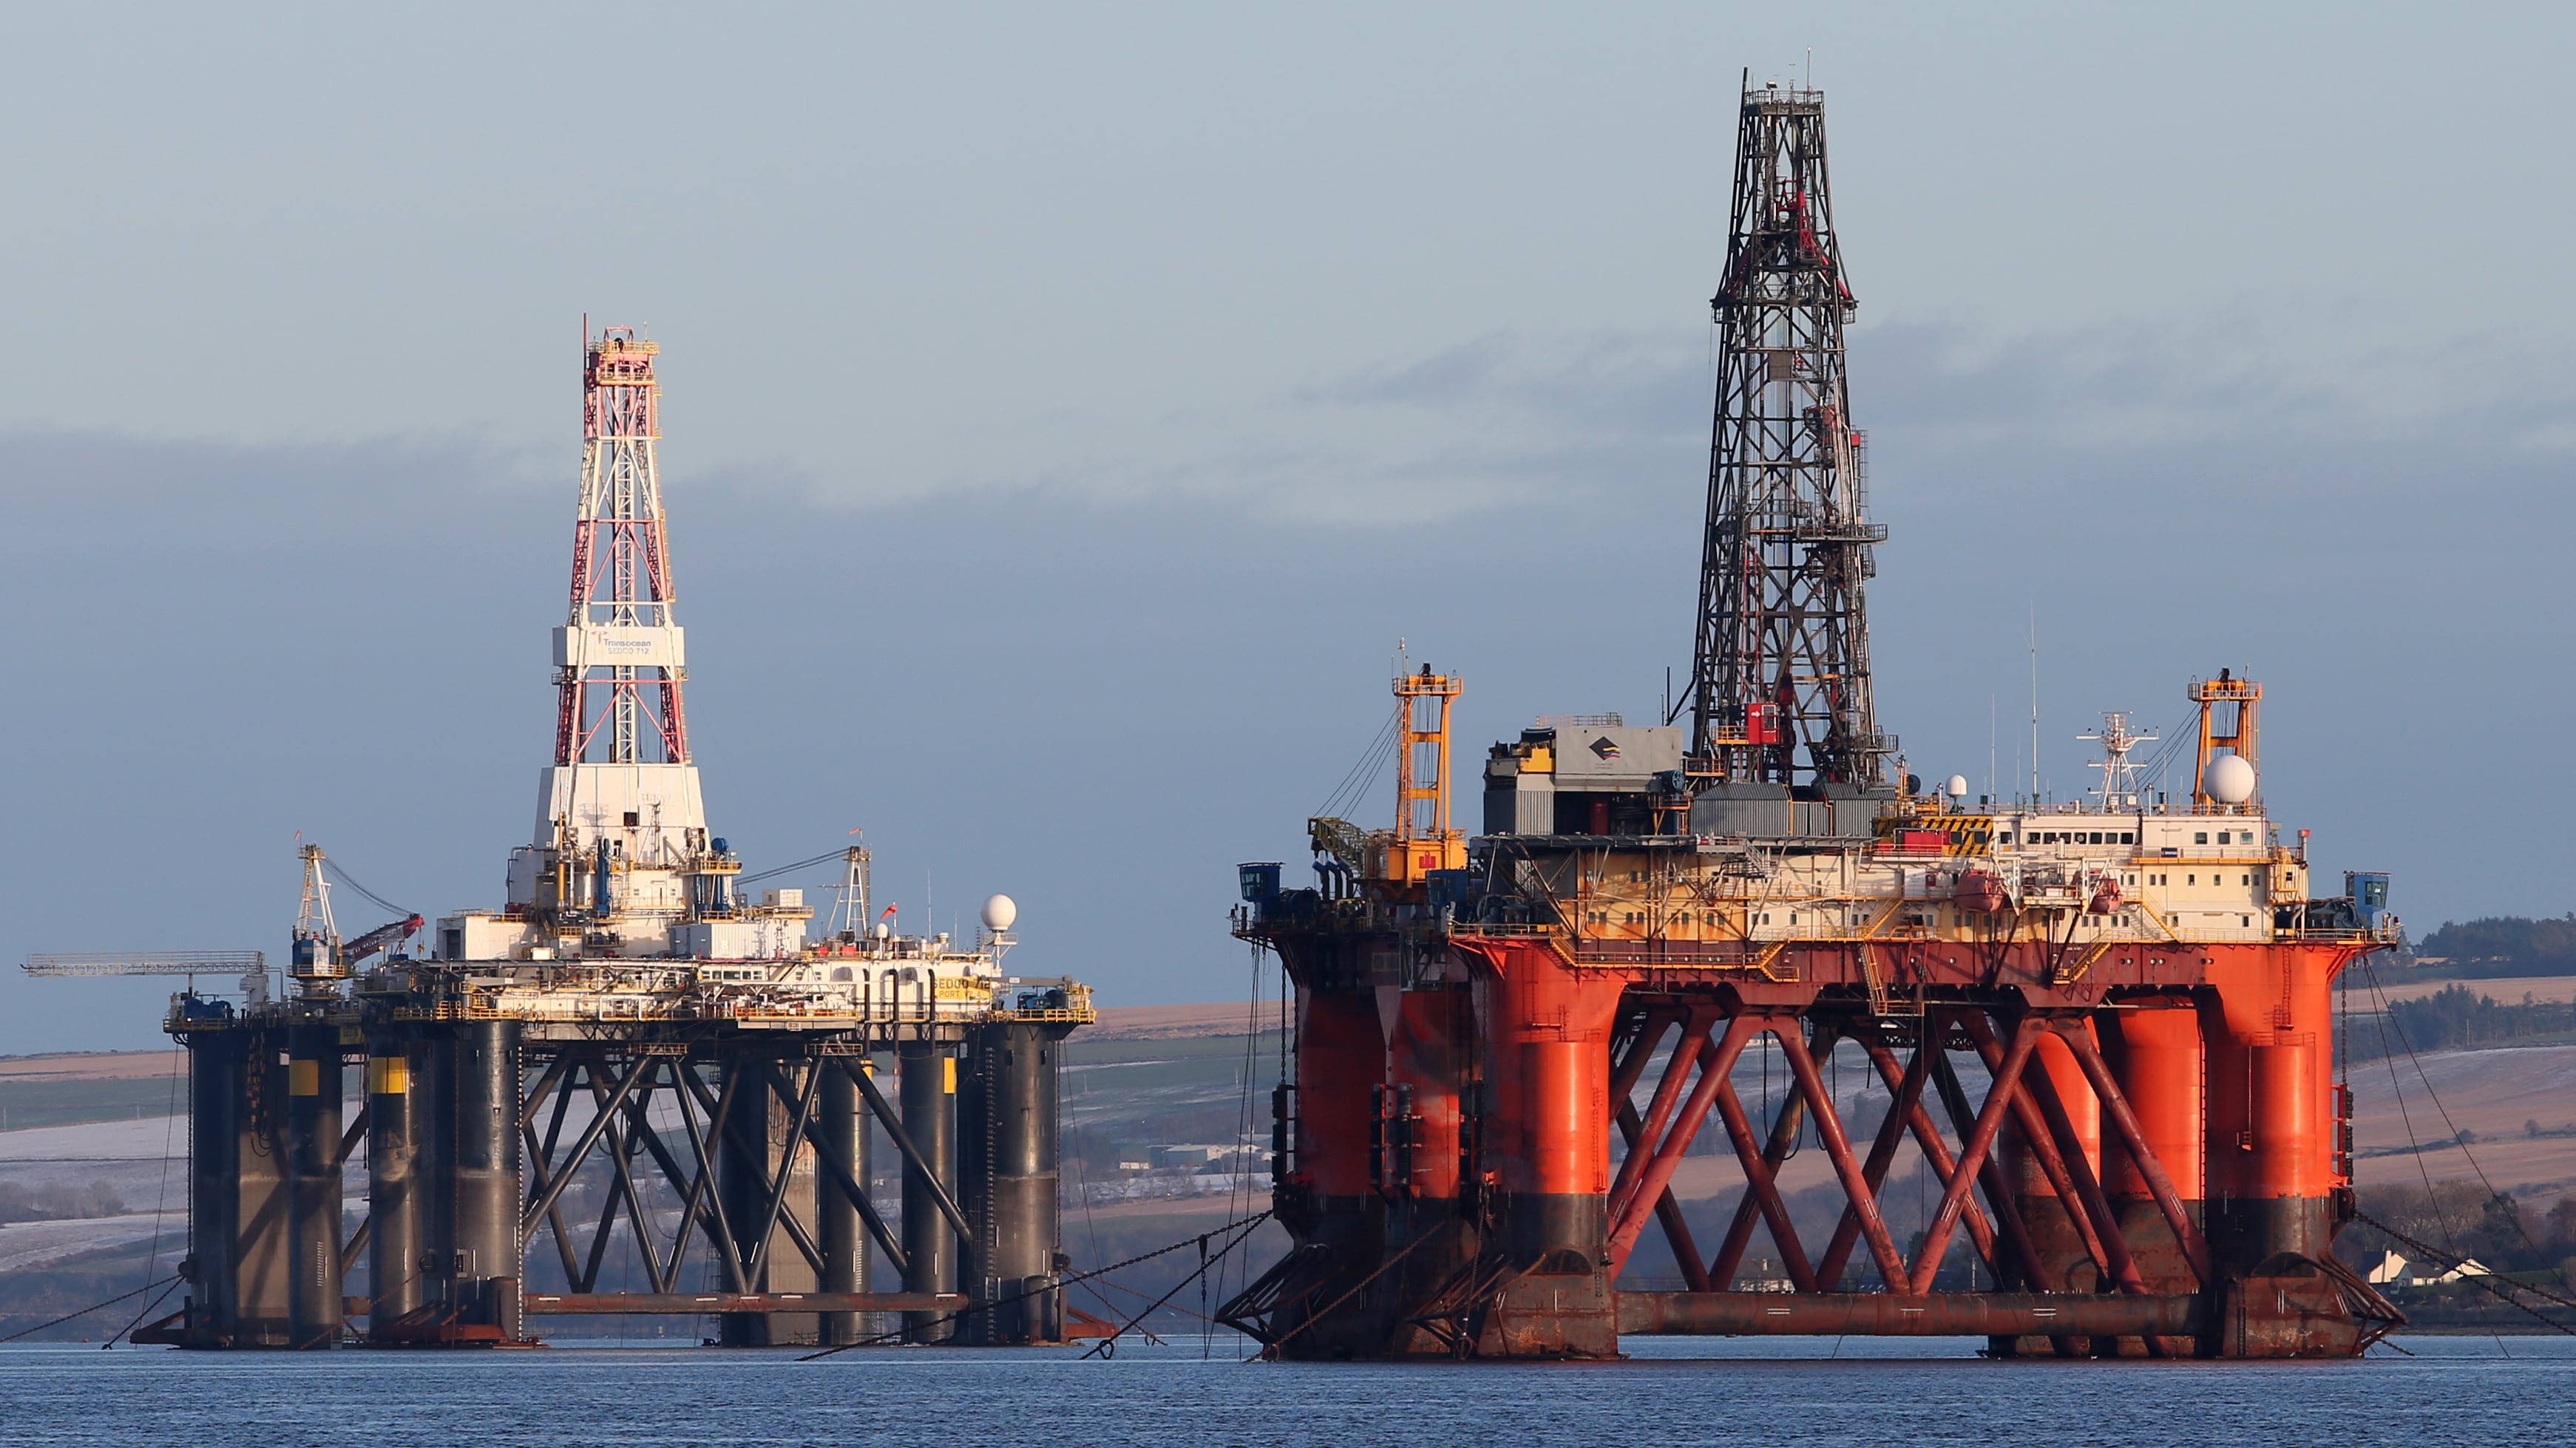 Labour has said it is against new oil and gas licences being granted